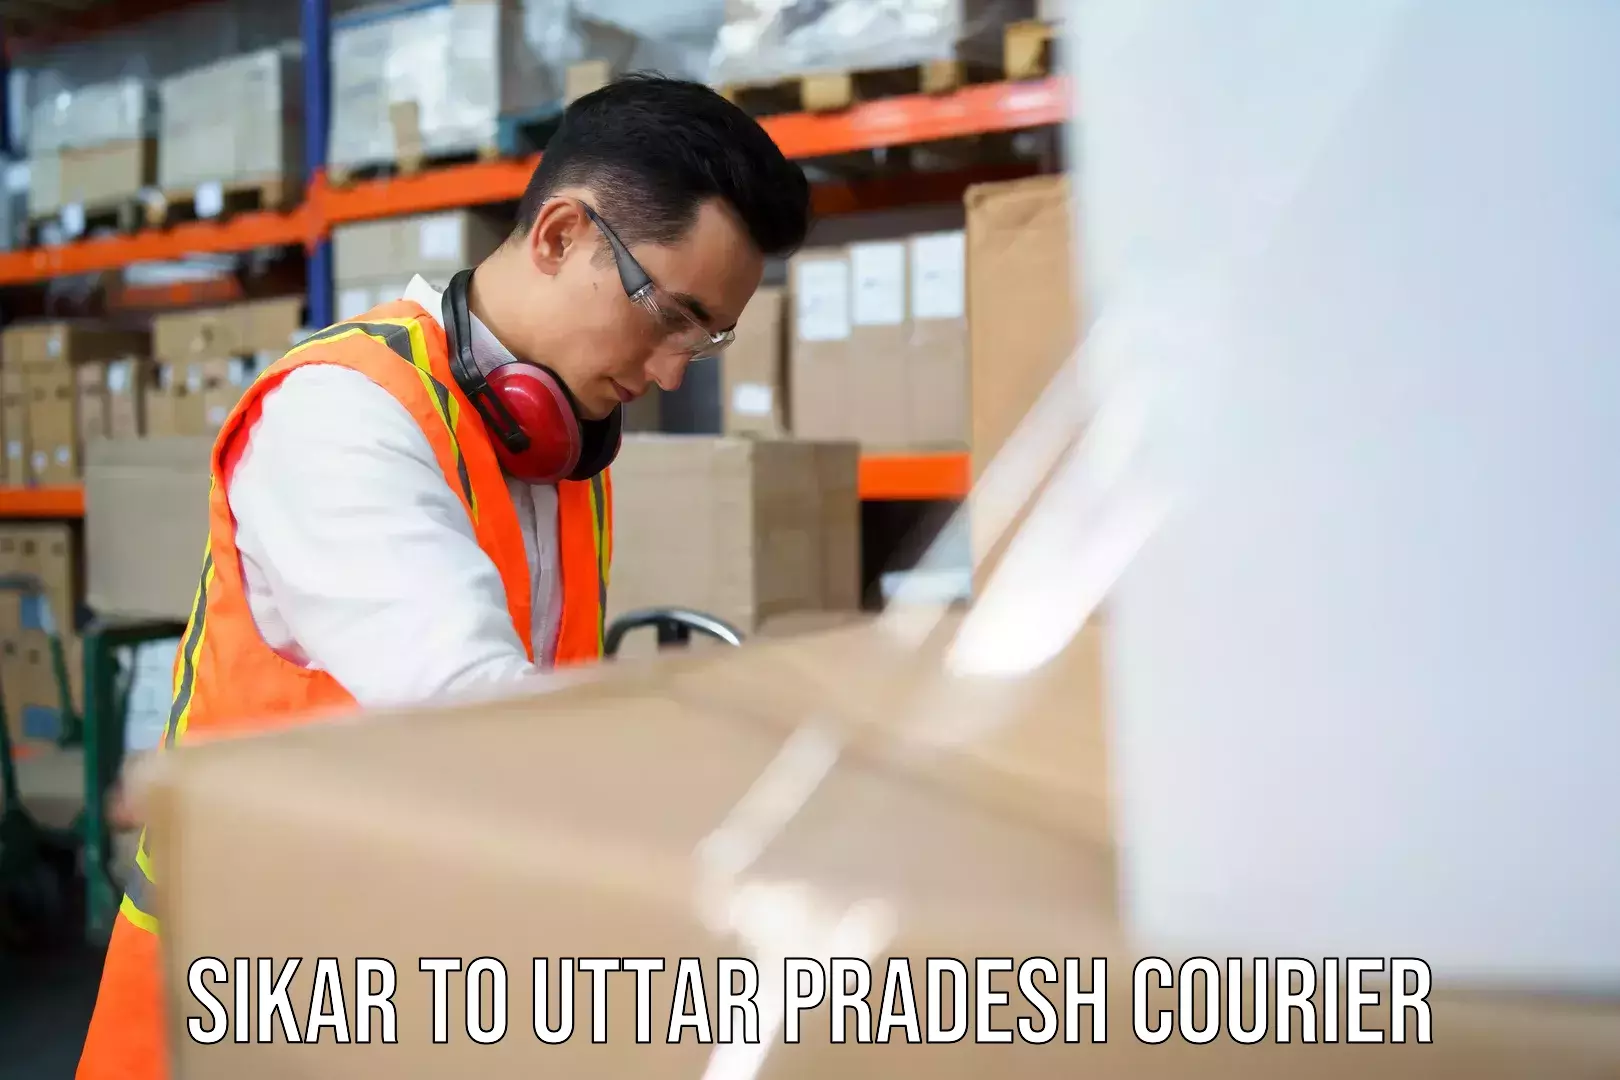 State-of-the-art courier technology Sikar to Sahaswan